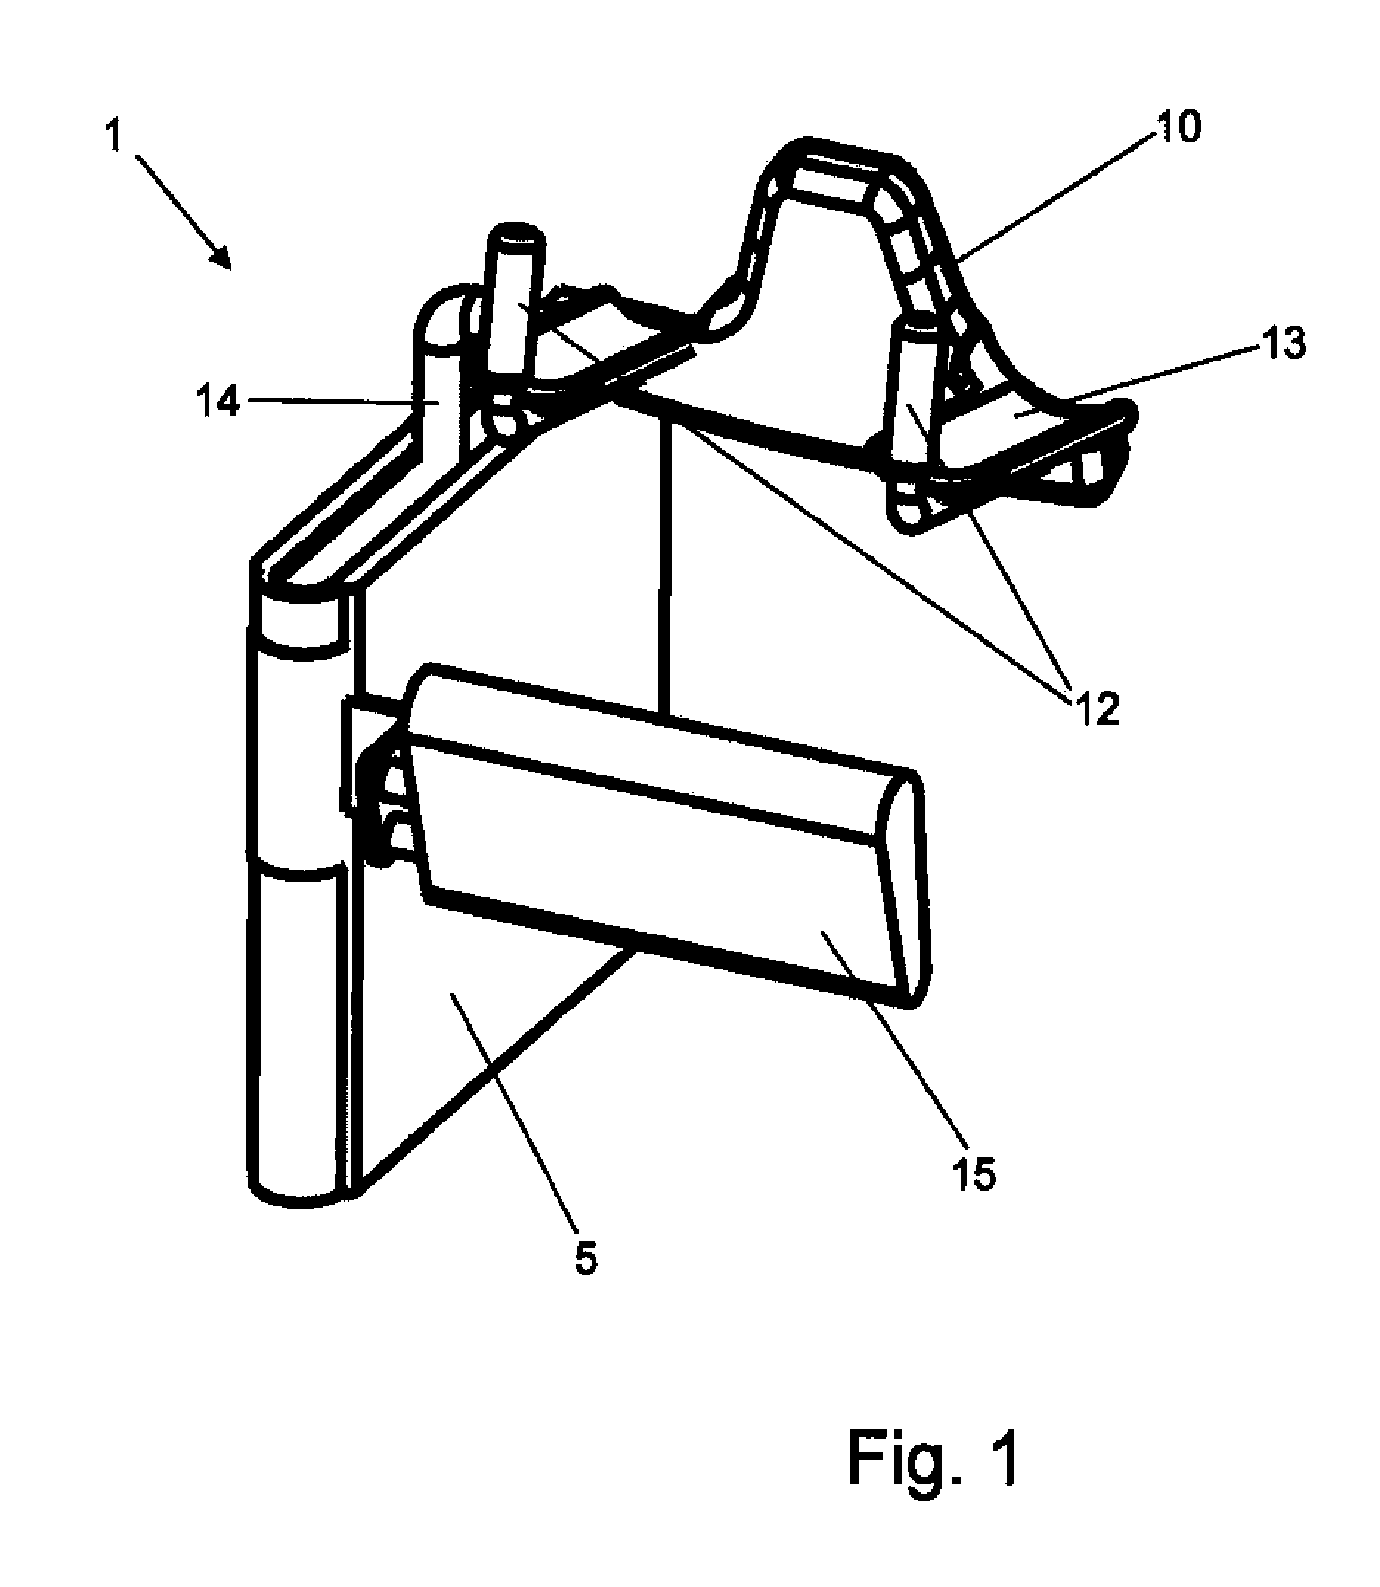 Device for assisting disabled persons